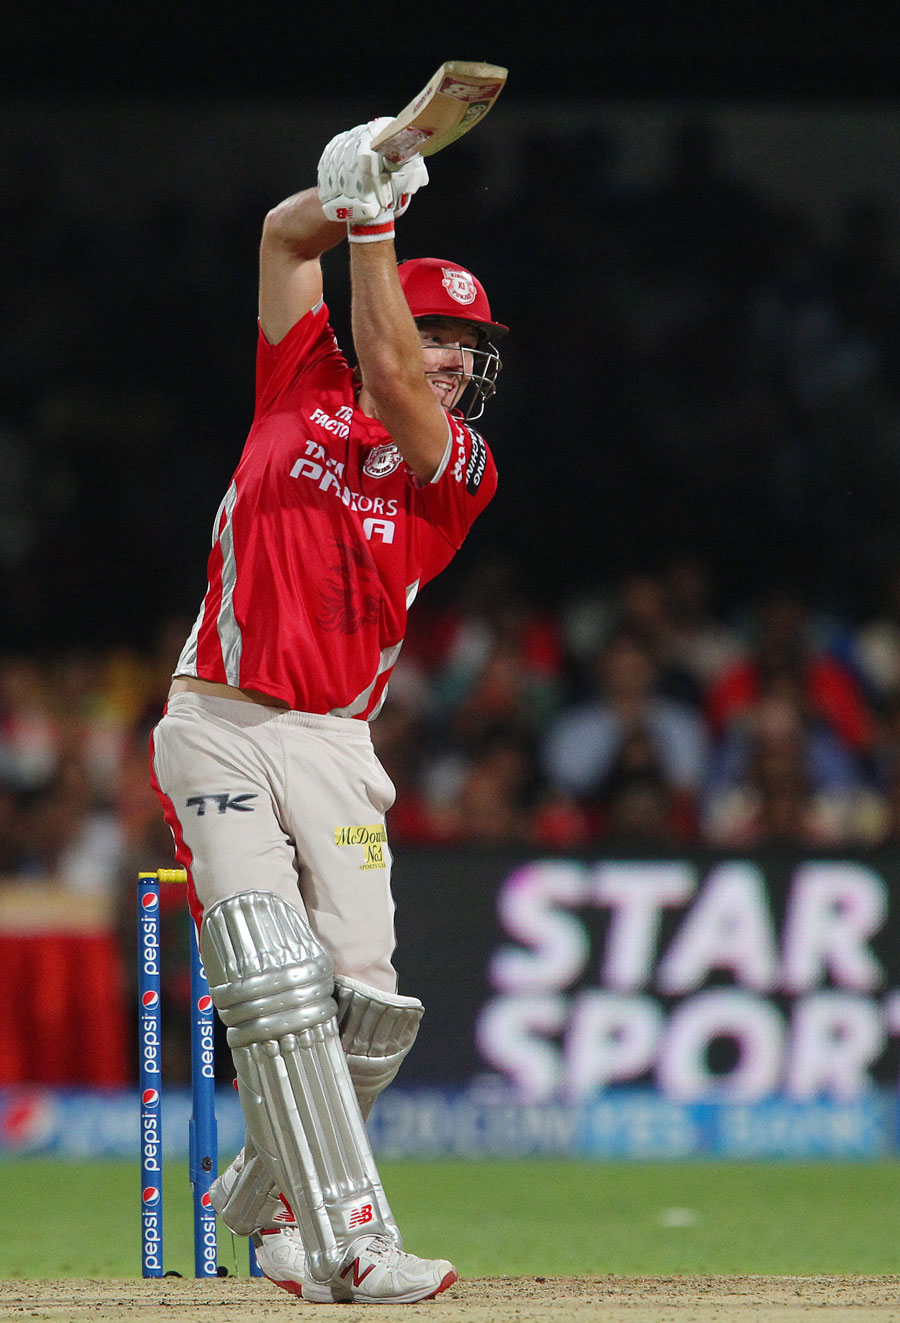 Top 10 Players in ipl 7